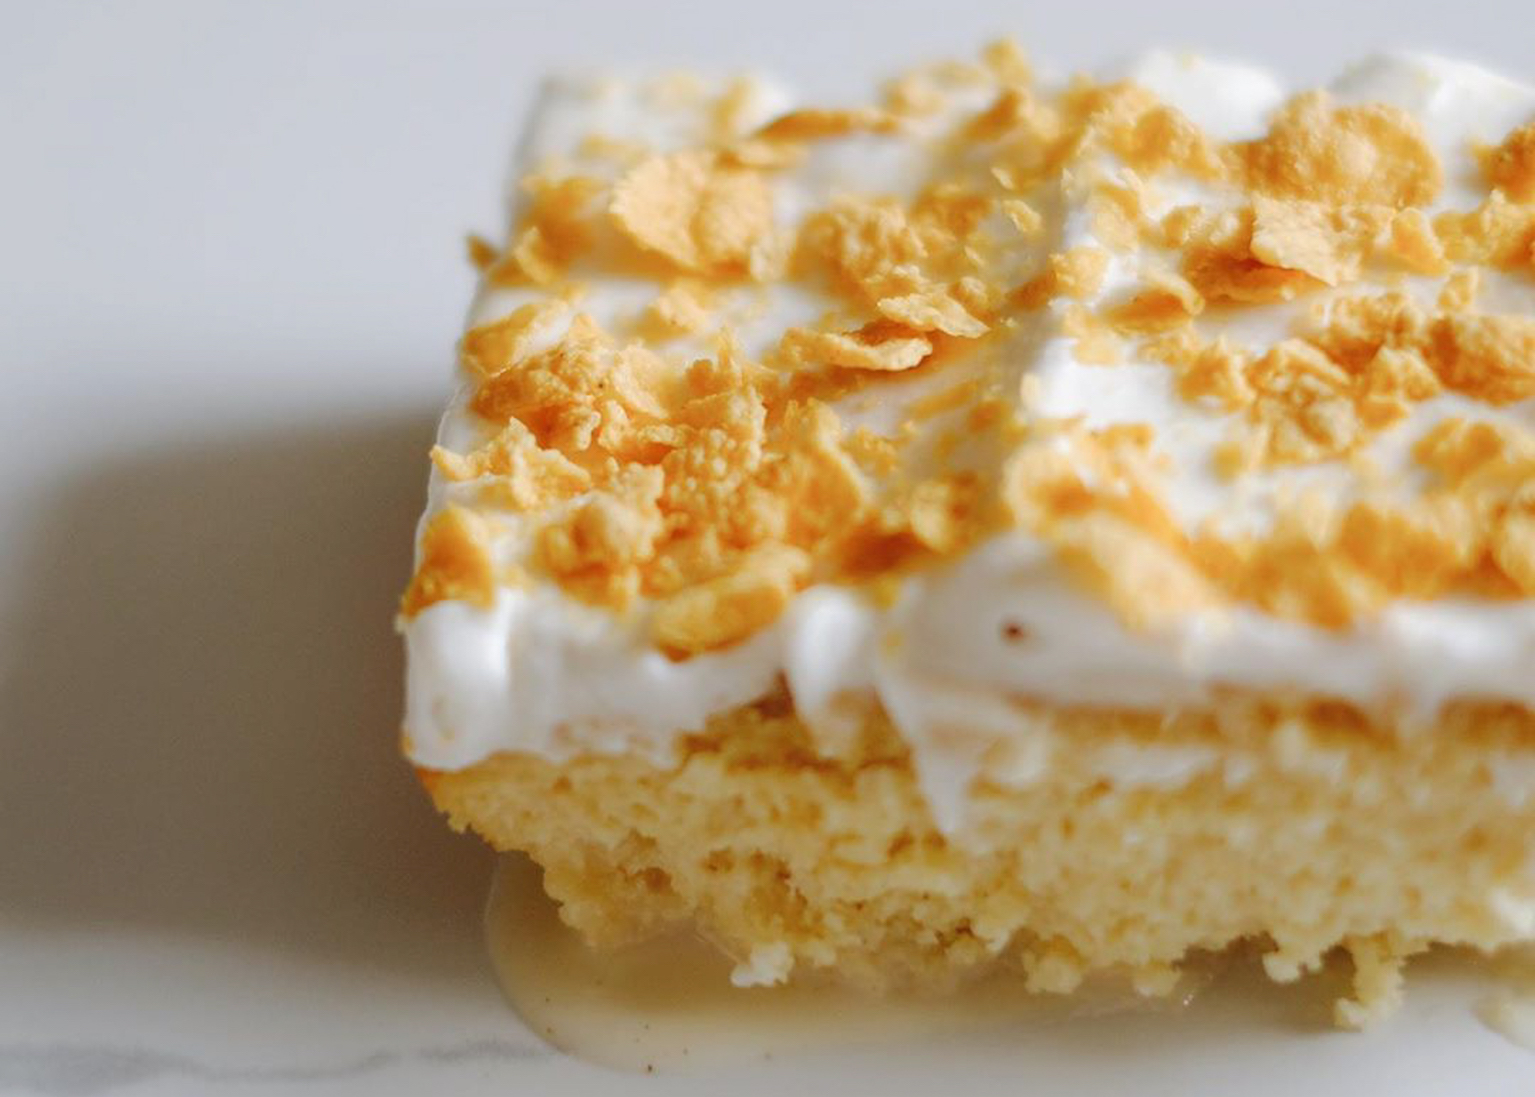 Here’s Where To Order Moist Cereal Milk Tres Leches Cake in the Metro